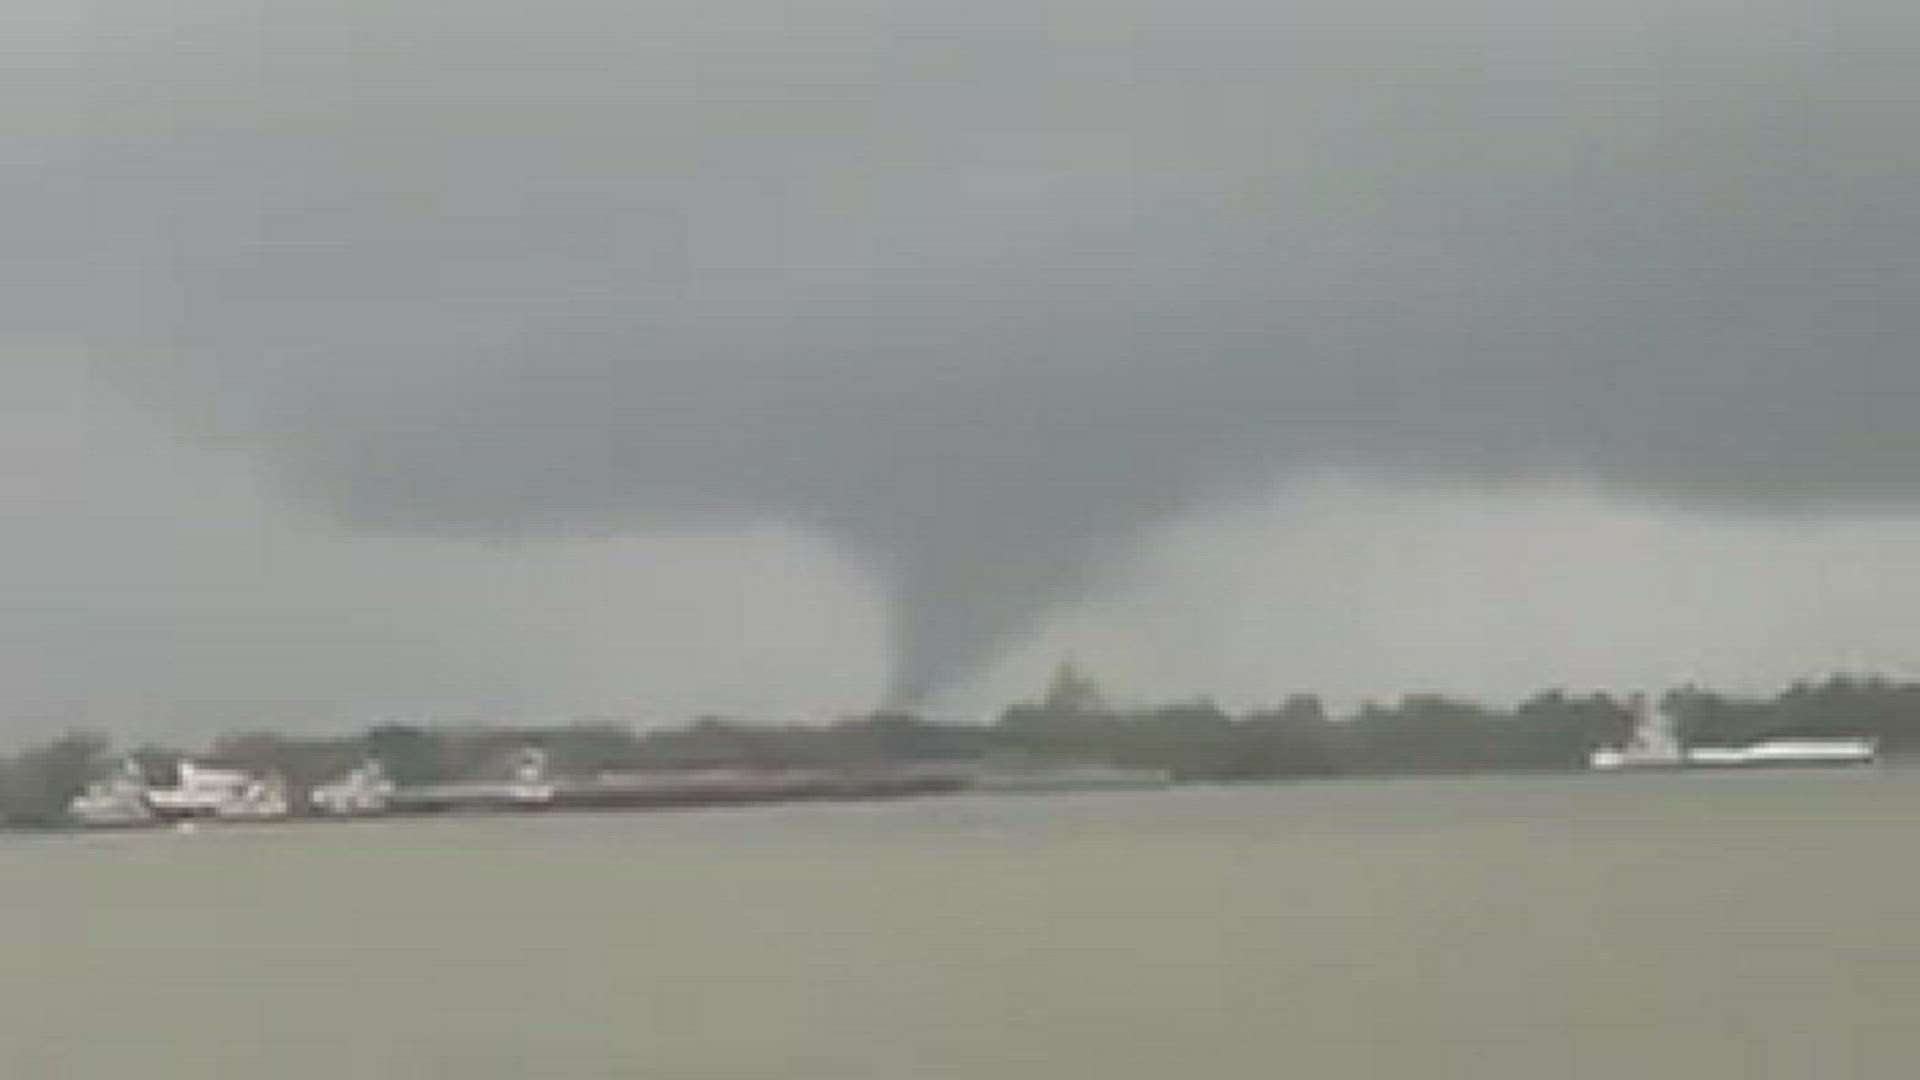 For the second time in a year, a tornado touched down in New Orleans and crossed the Mississippi River into Arabi, La.